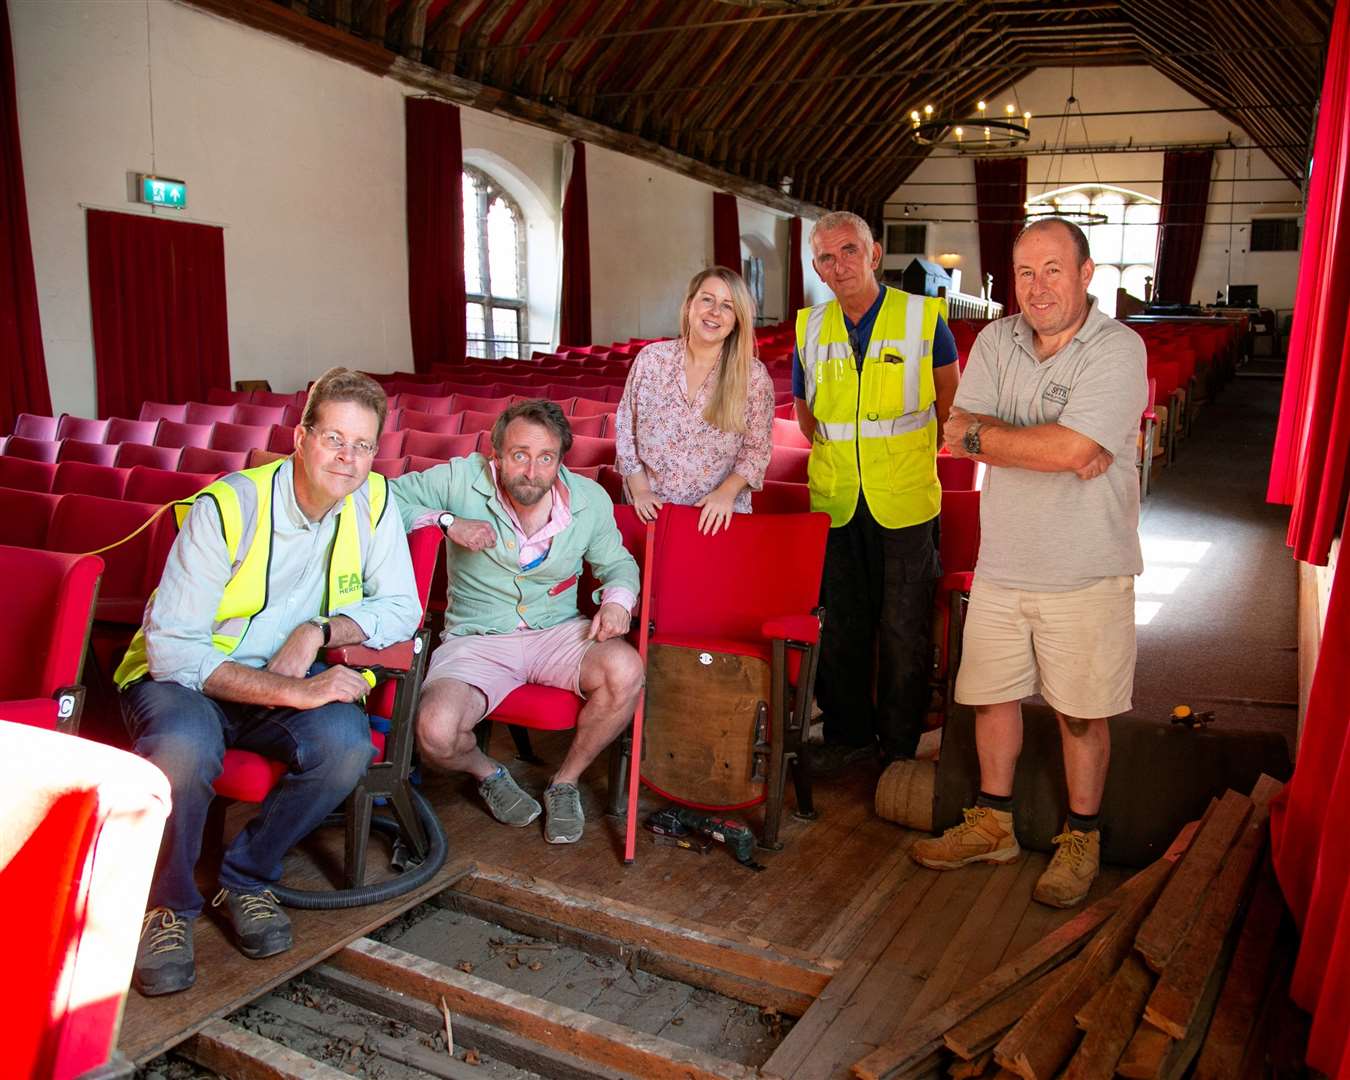 The medieval floorboards have recently been discovered at St George's Guildhall in King's Lynn